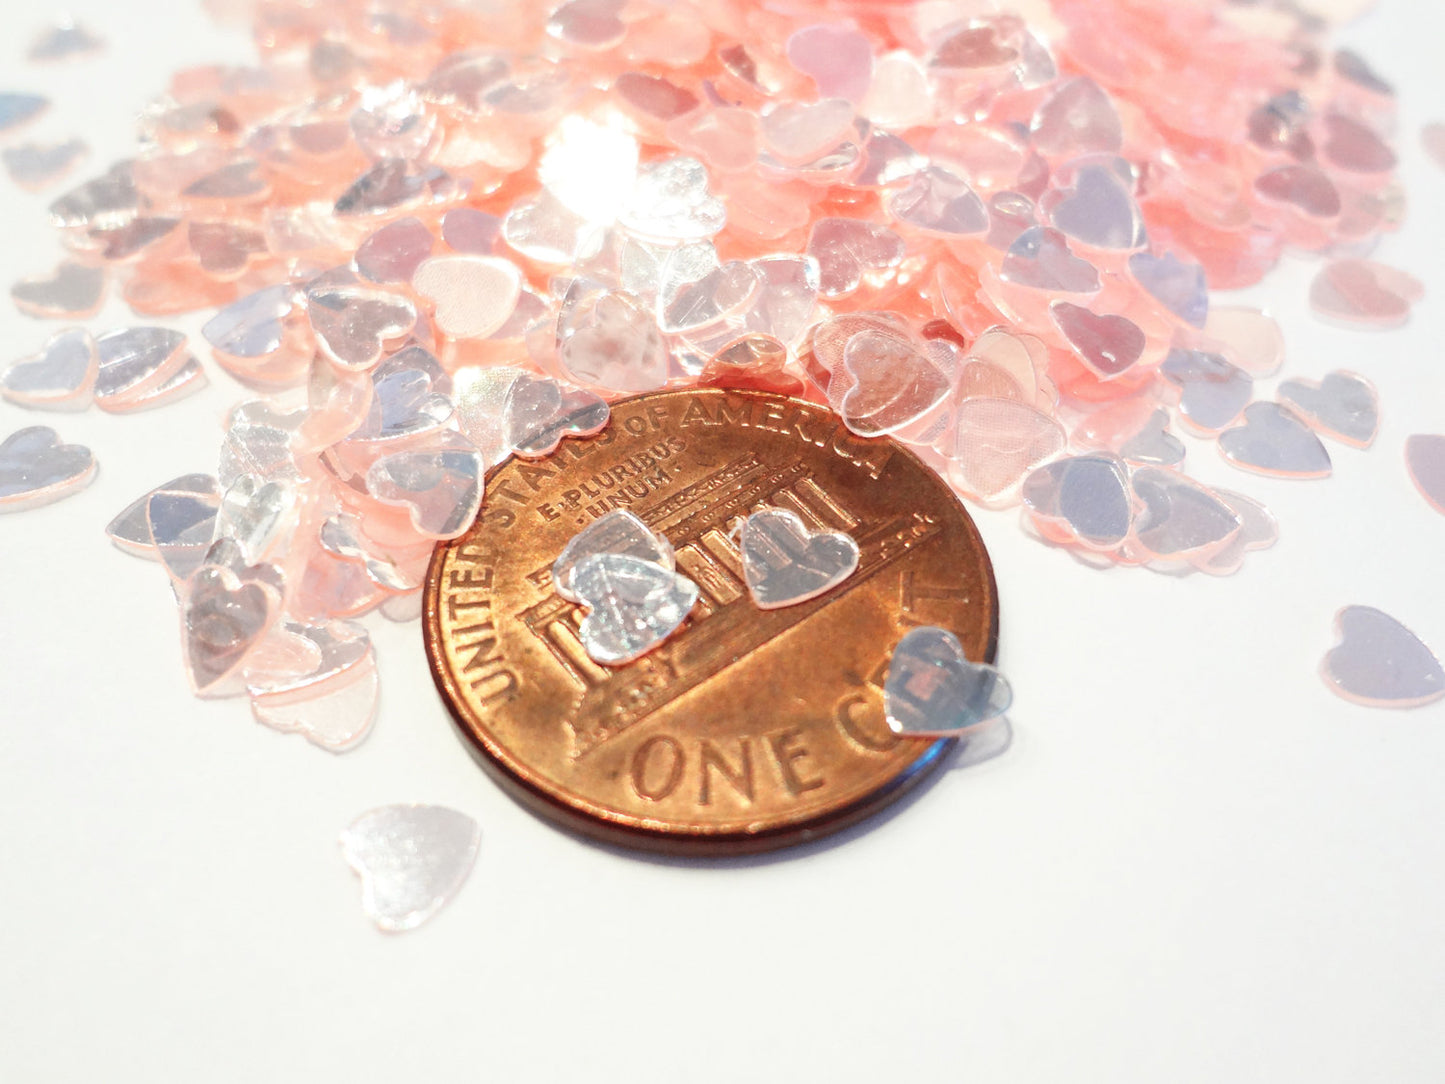 Clear Pink Heart Sequins, 4mm